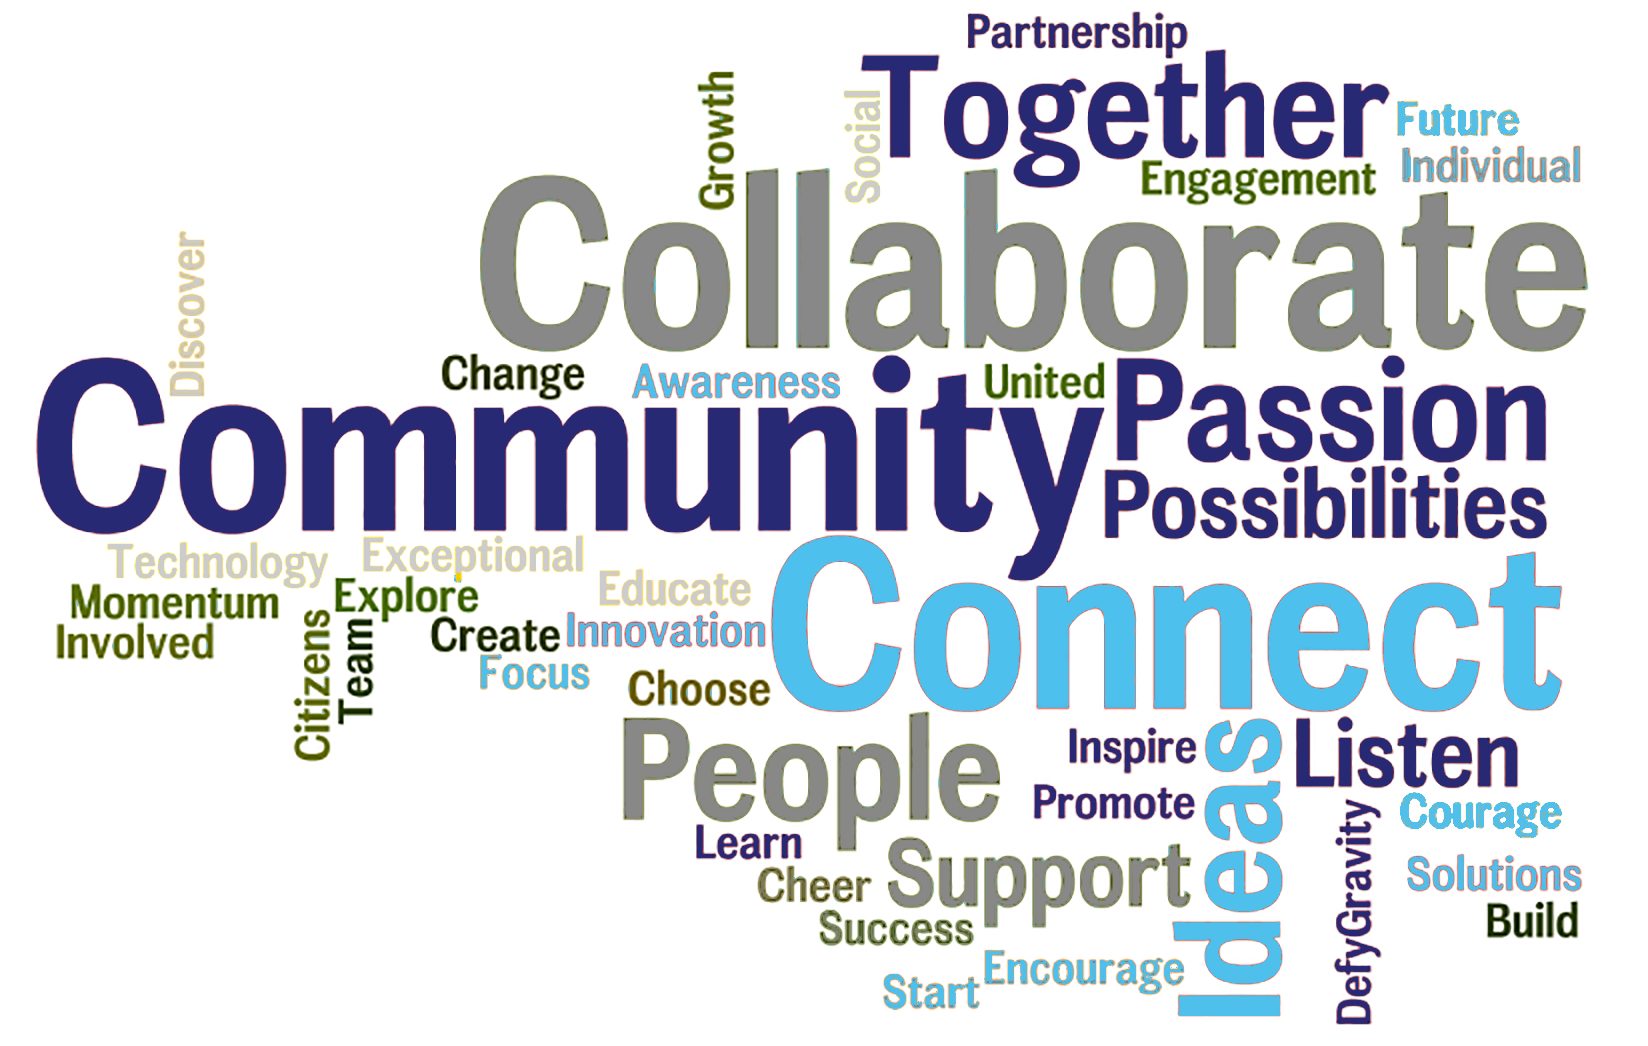 Wordle about community: collaborate, connect, Together, People, support..